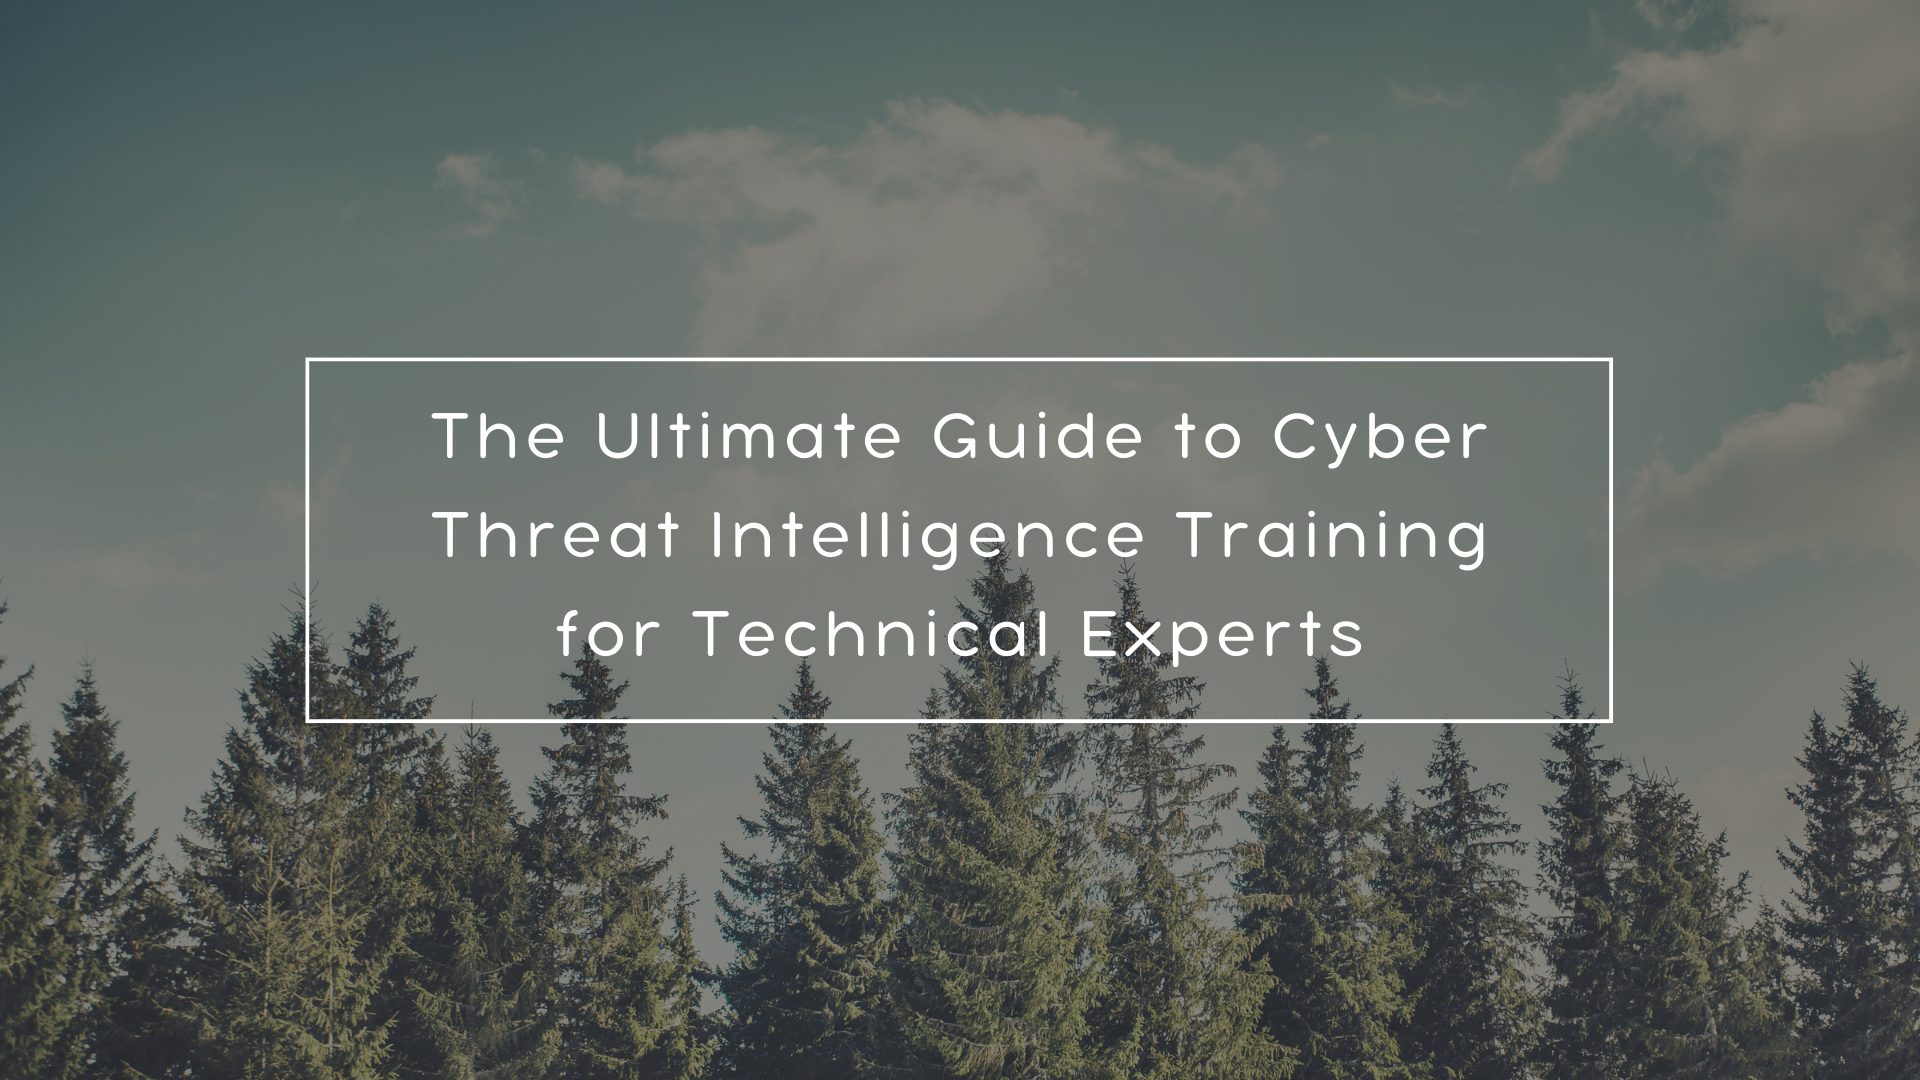 The Ultimate Guide to Cyber Threat Intelligence Training for Technical Experts